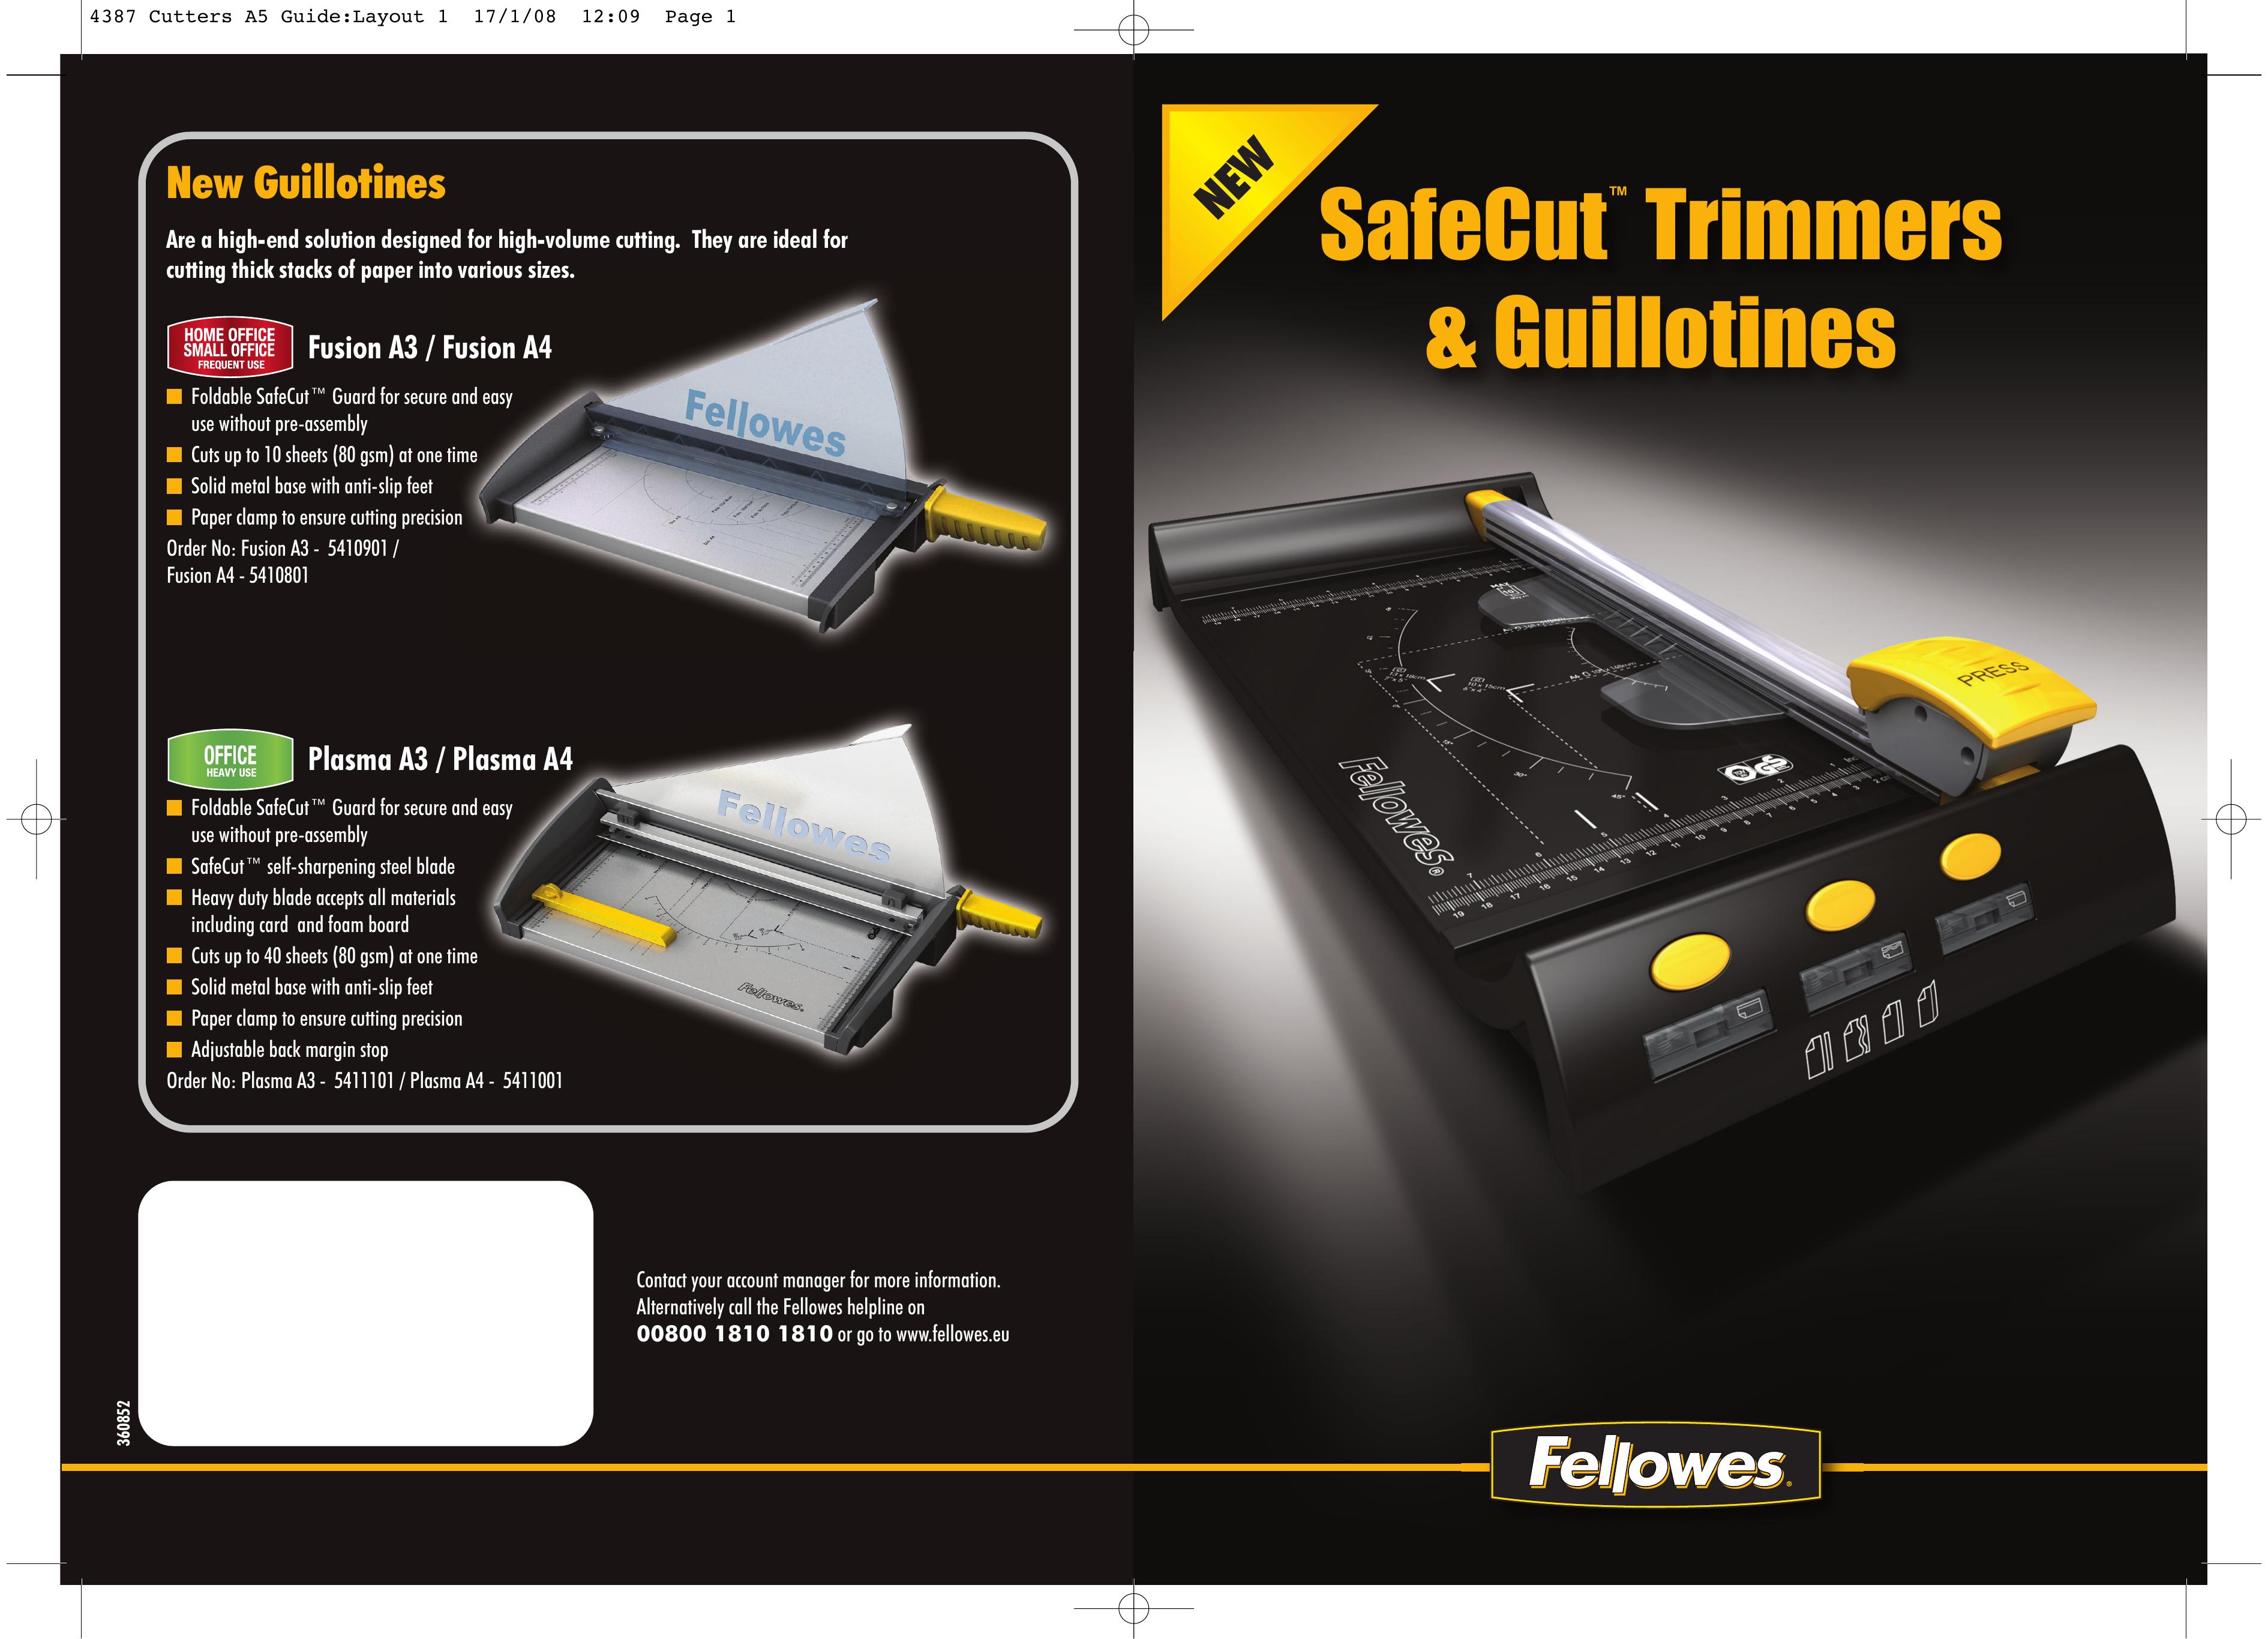 Fellowes A3 - 5411101 Trimmer User Manual